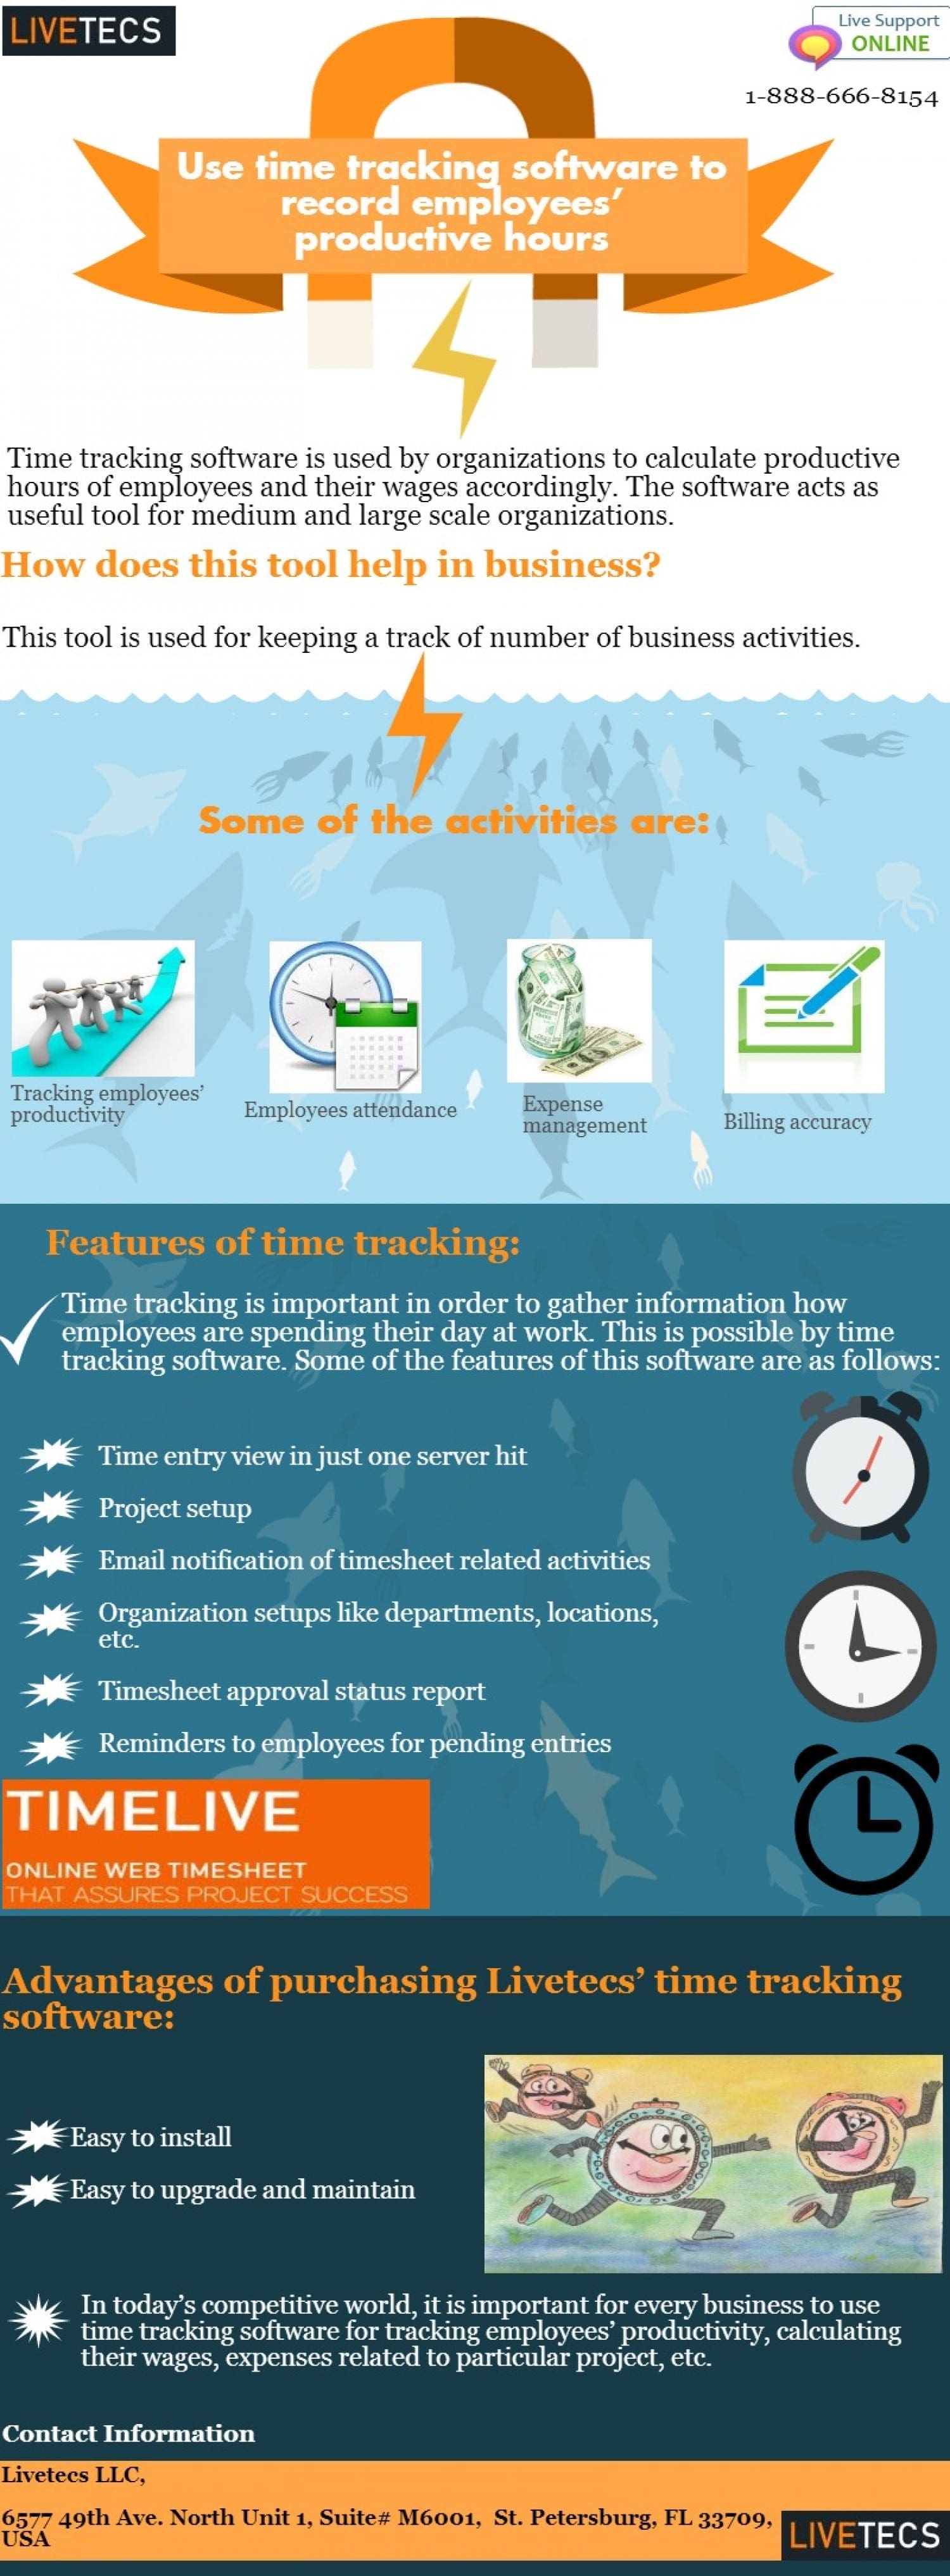 List of benefits to using time tracking software for employees